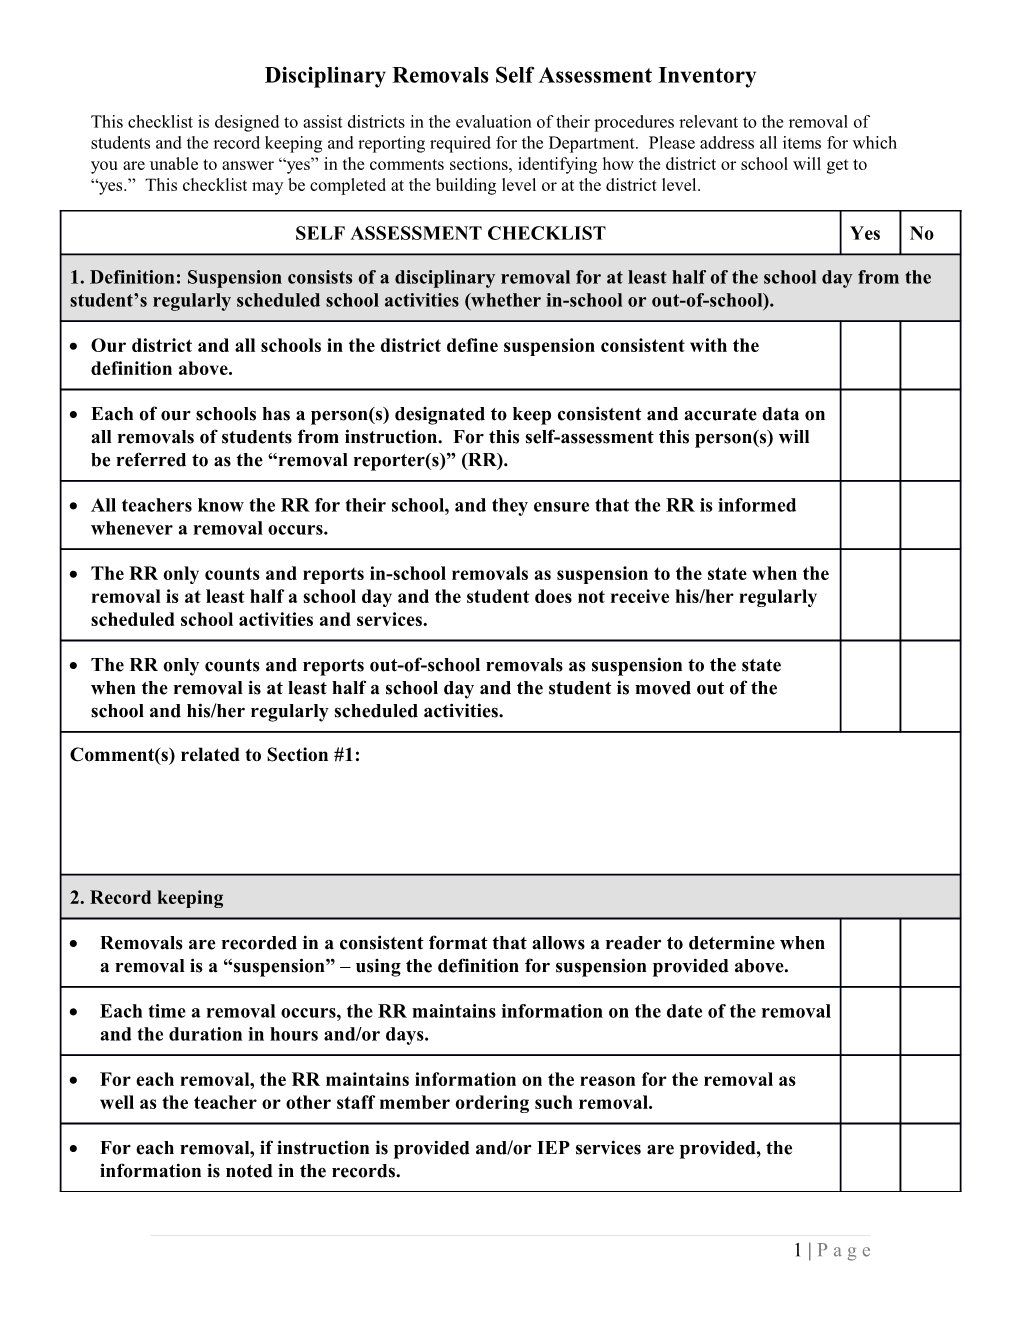 Disciplinary Removals Self-Assessment Inventory